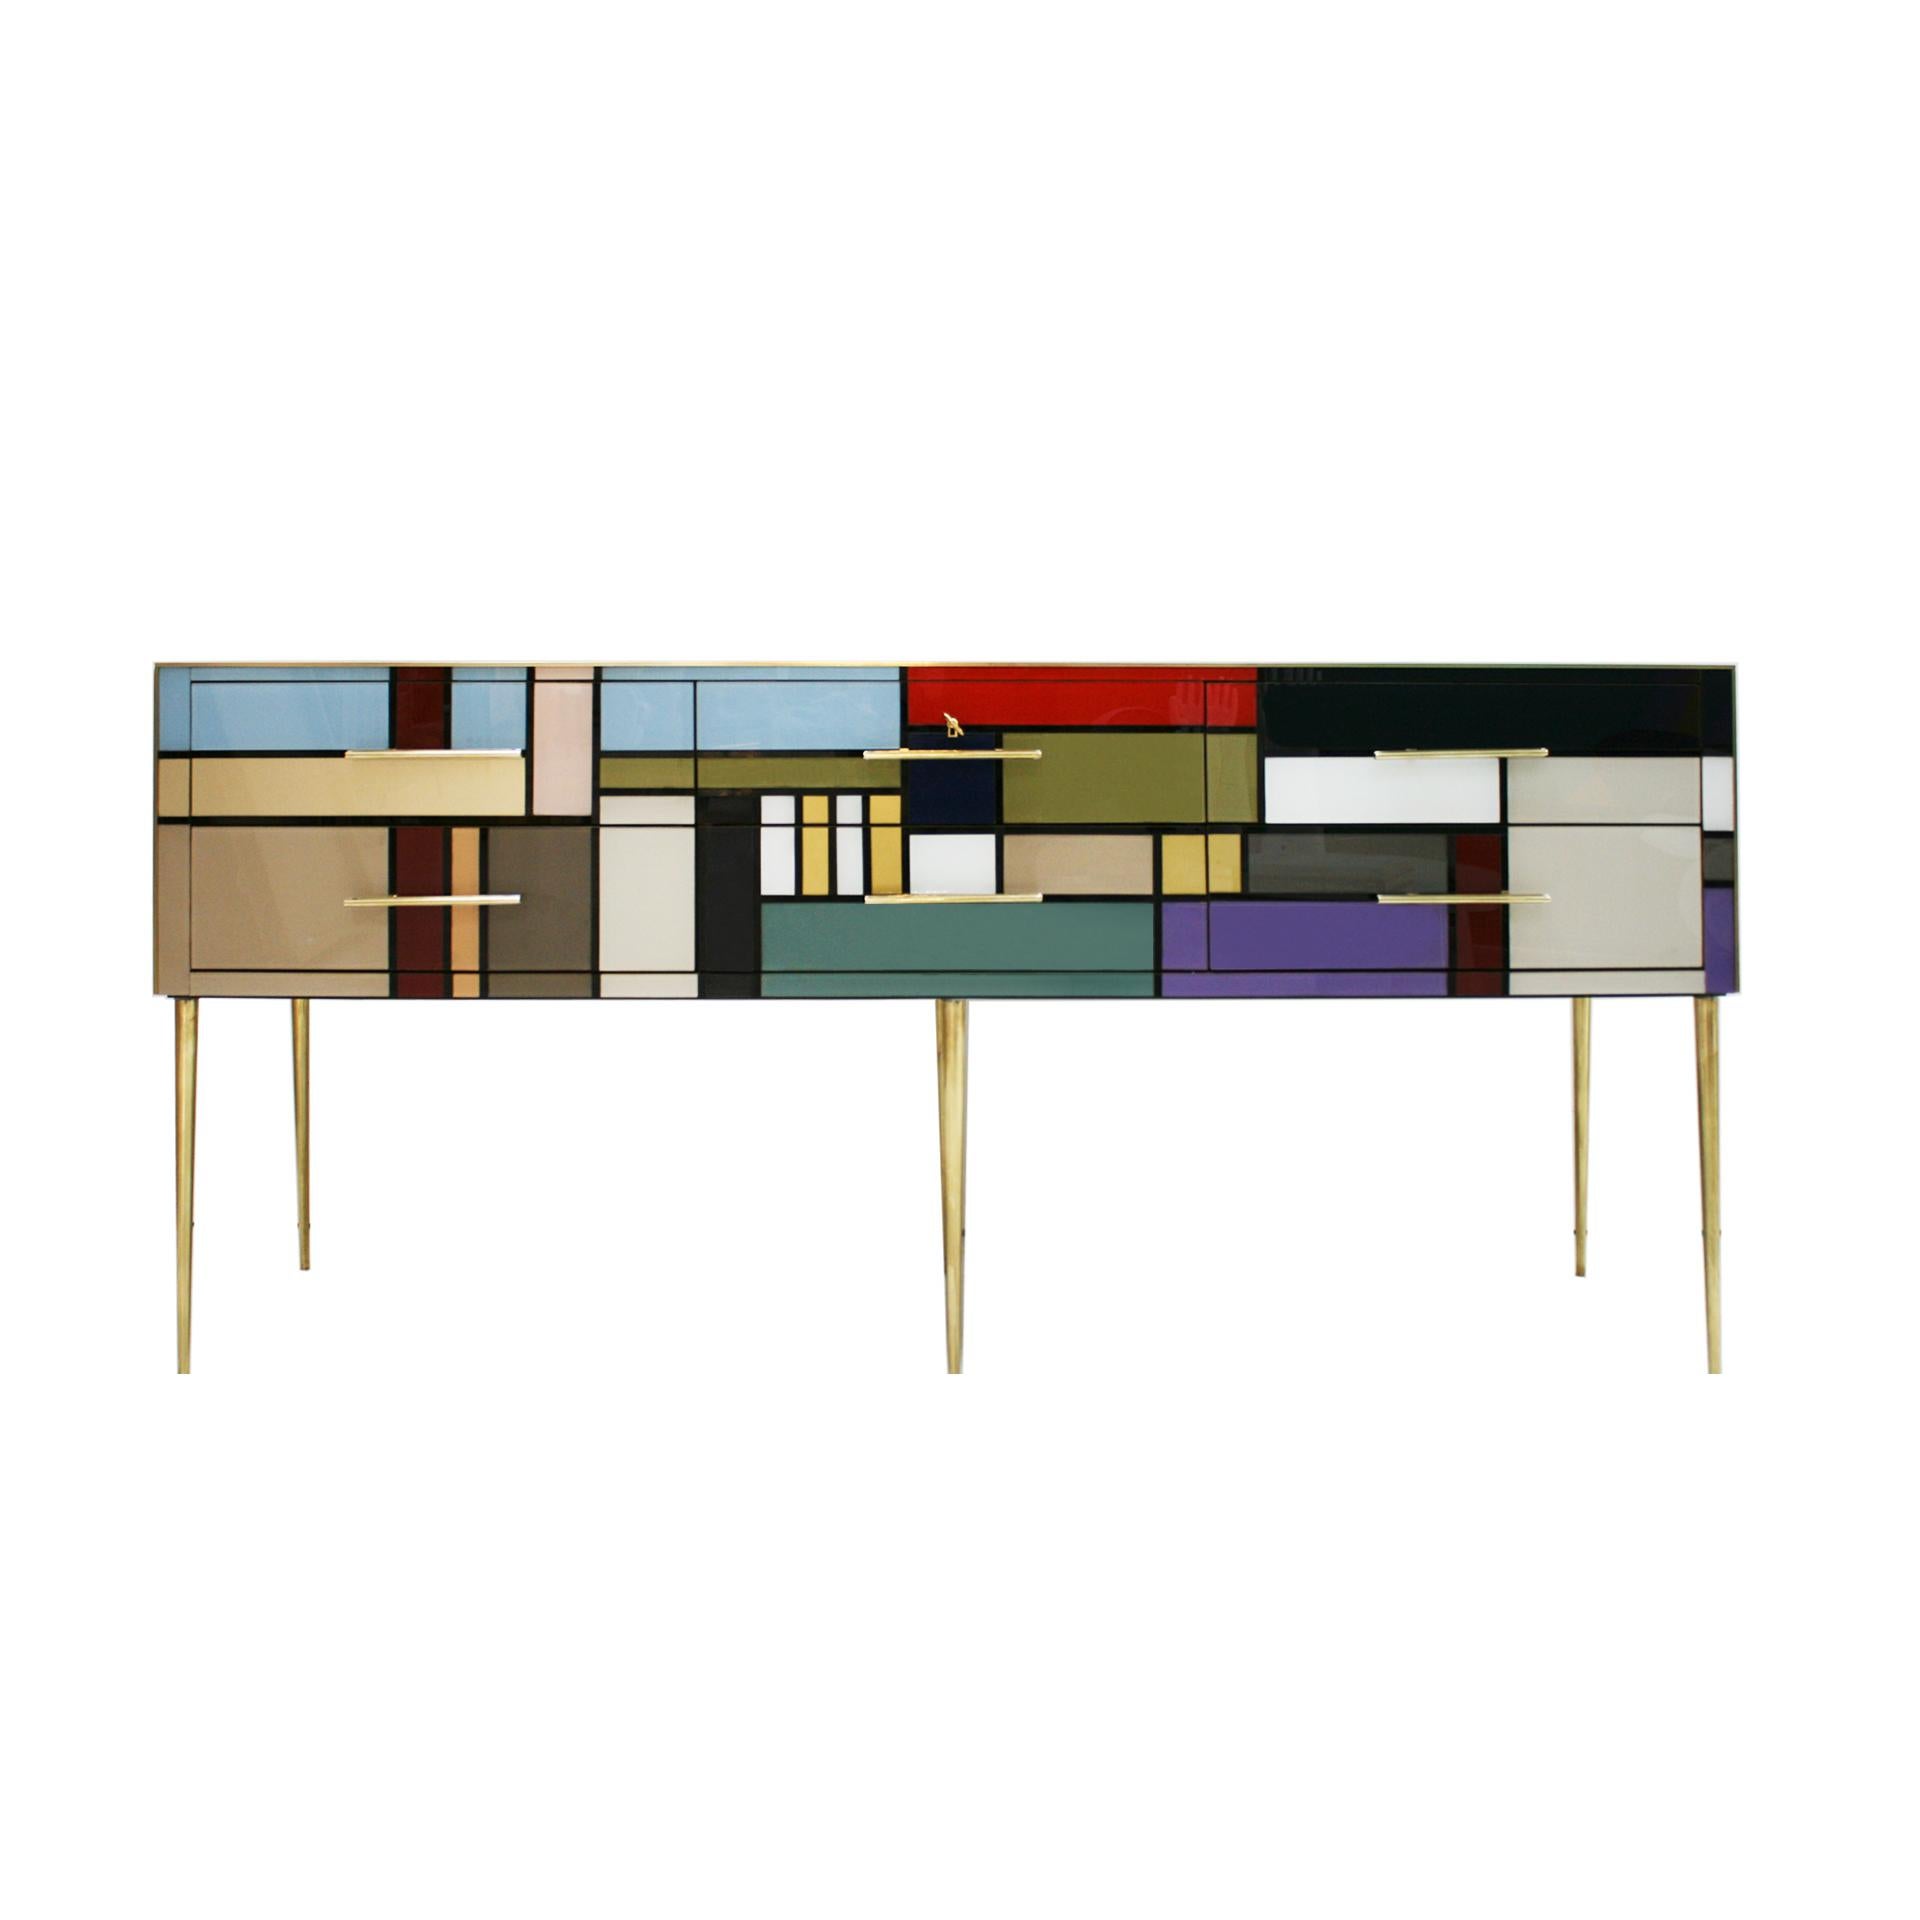 Italian sideboard with six drawers and six legs, with wooden structure covered in colored Murano glass, profiles, handles and feet in brass. Italian manufacture.

Our main target is customer satisfaction, so we include in the price for this item